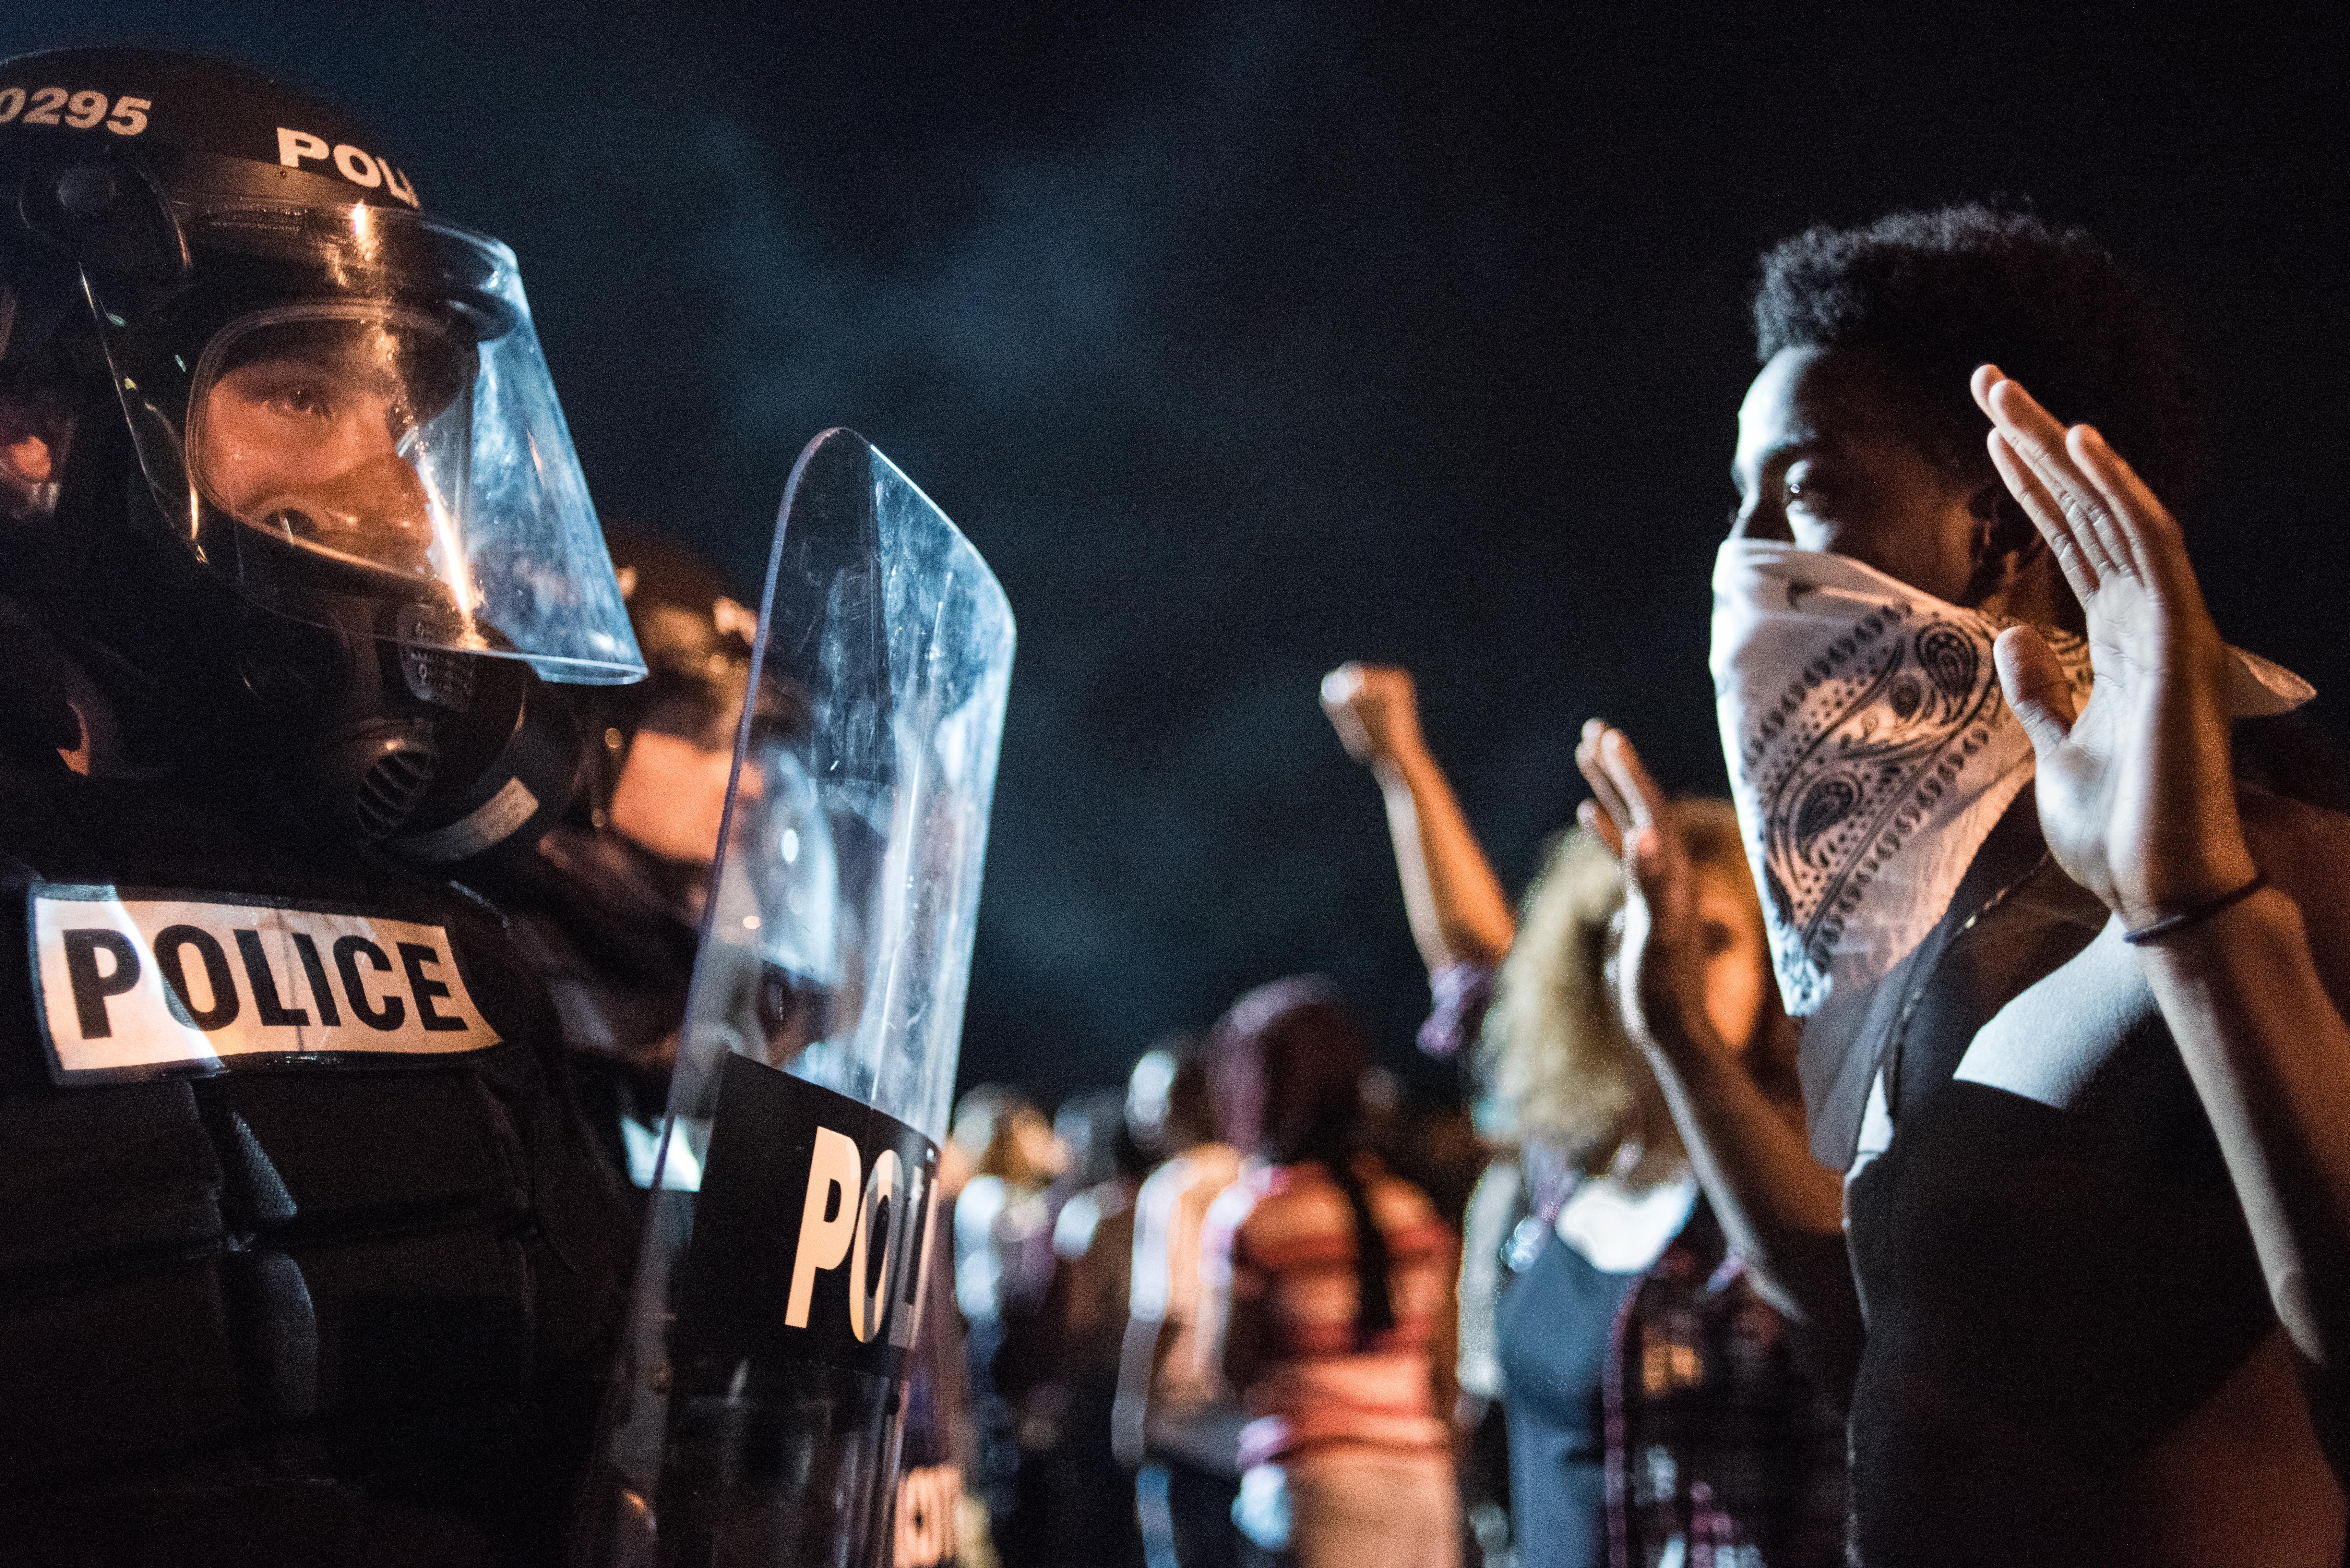 Protests Escalate In Memphis After U.S. Marshals Fatally Shoot Young Black Man